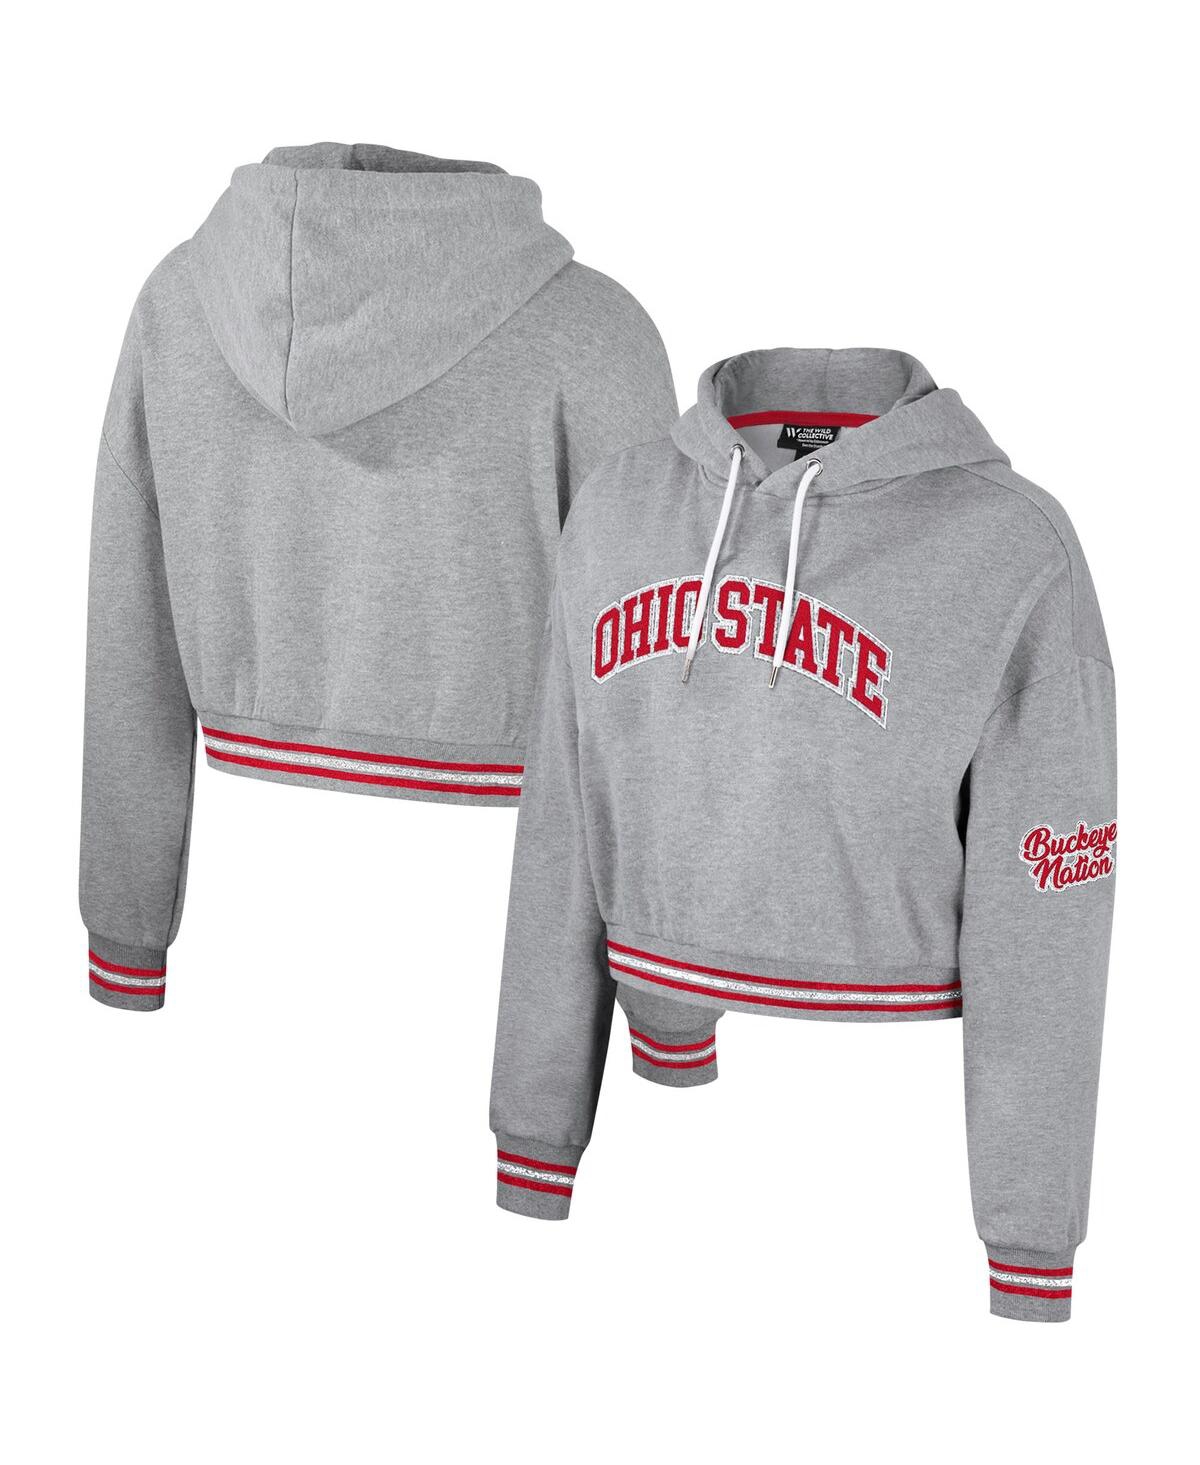 Women's The Wild Collective Heather Gray Distressed Ohio State Buckeyes Cropped Shimmer Pullover Hoodie - Heather Gray